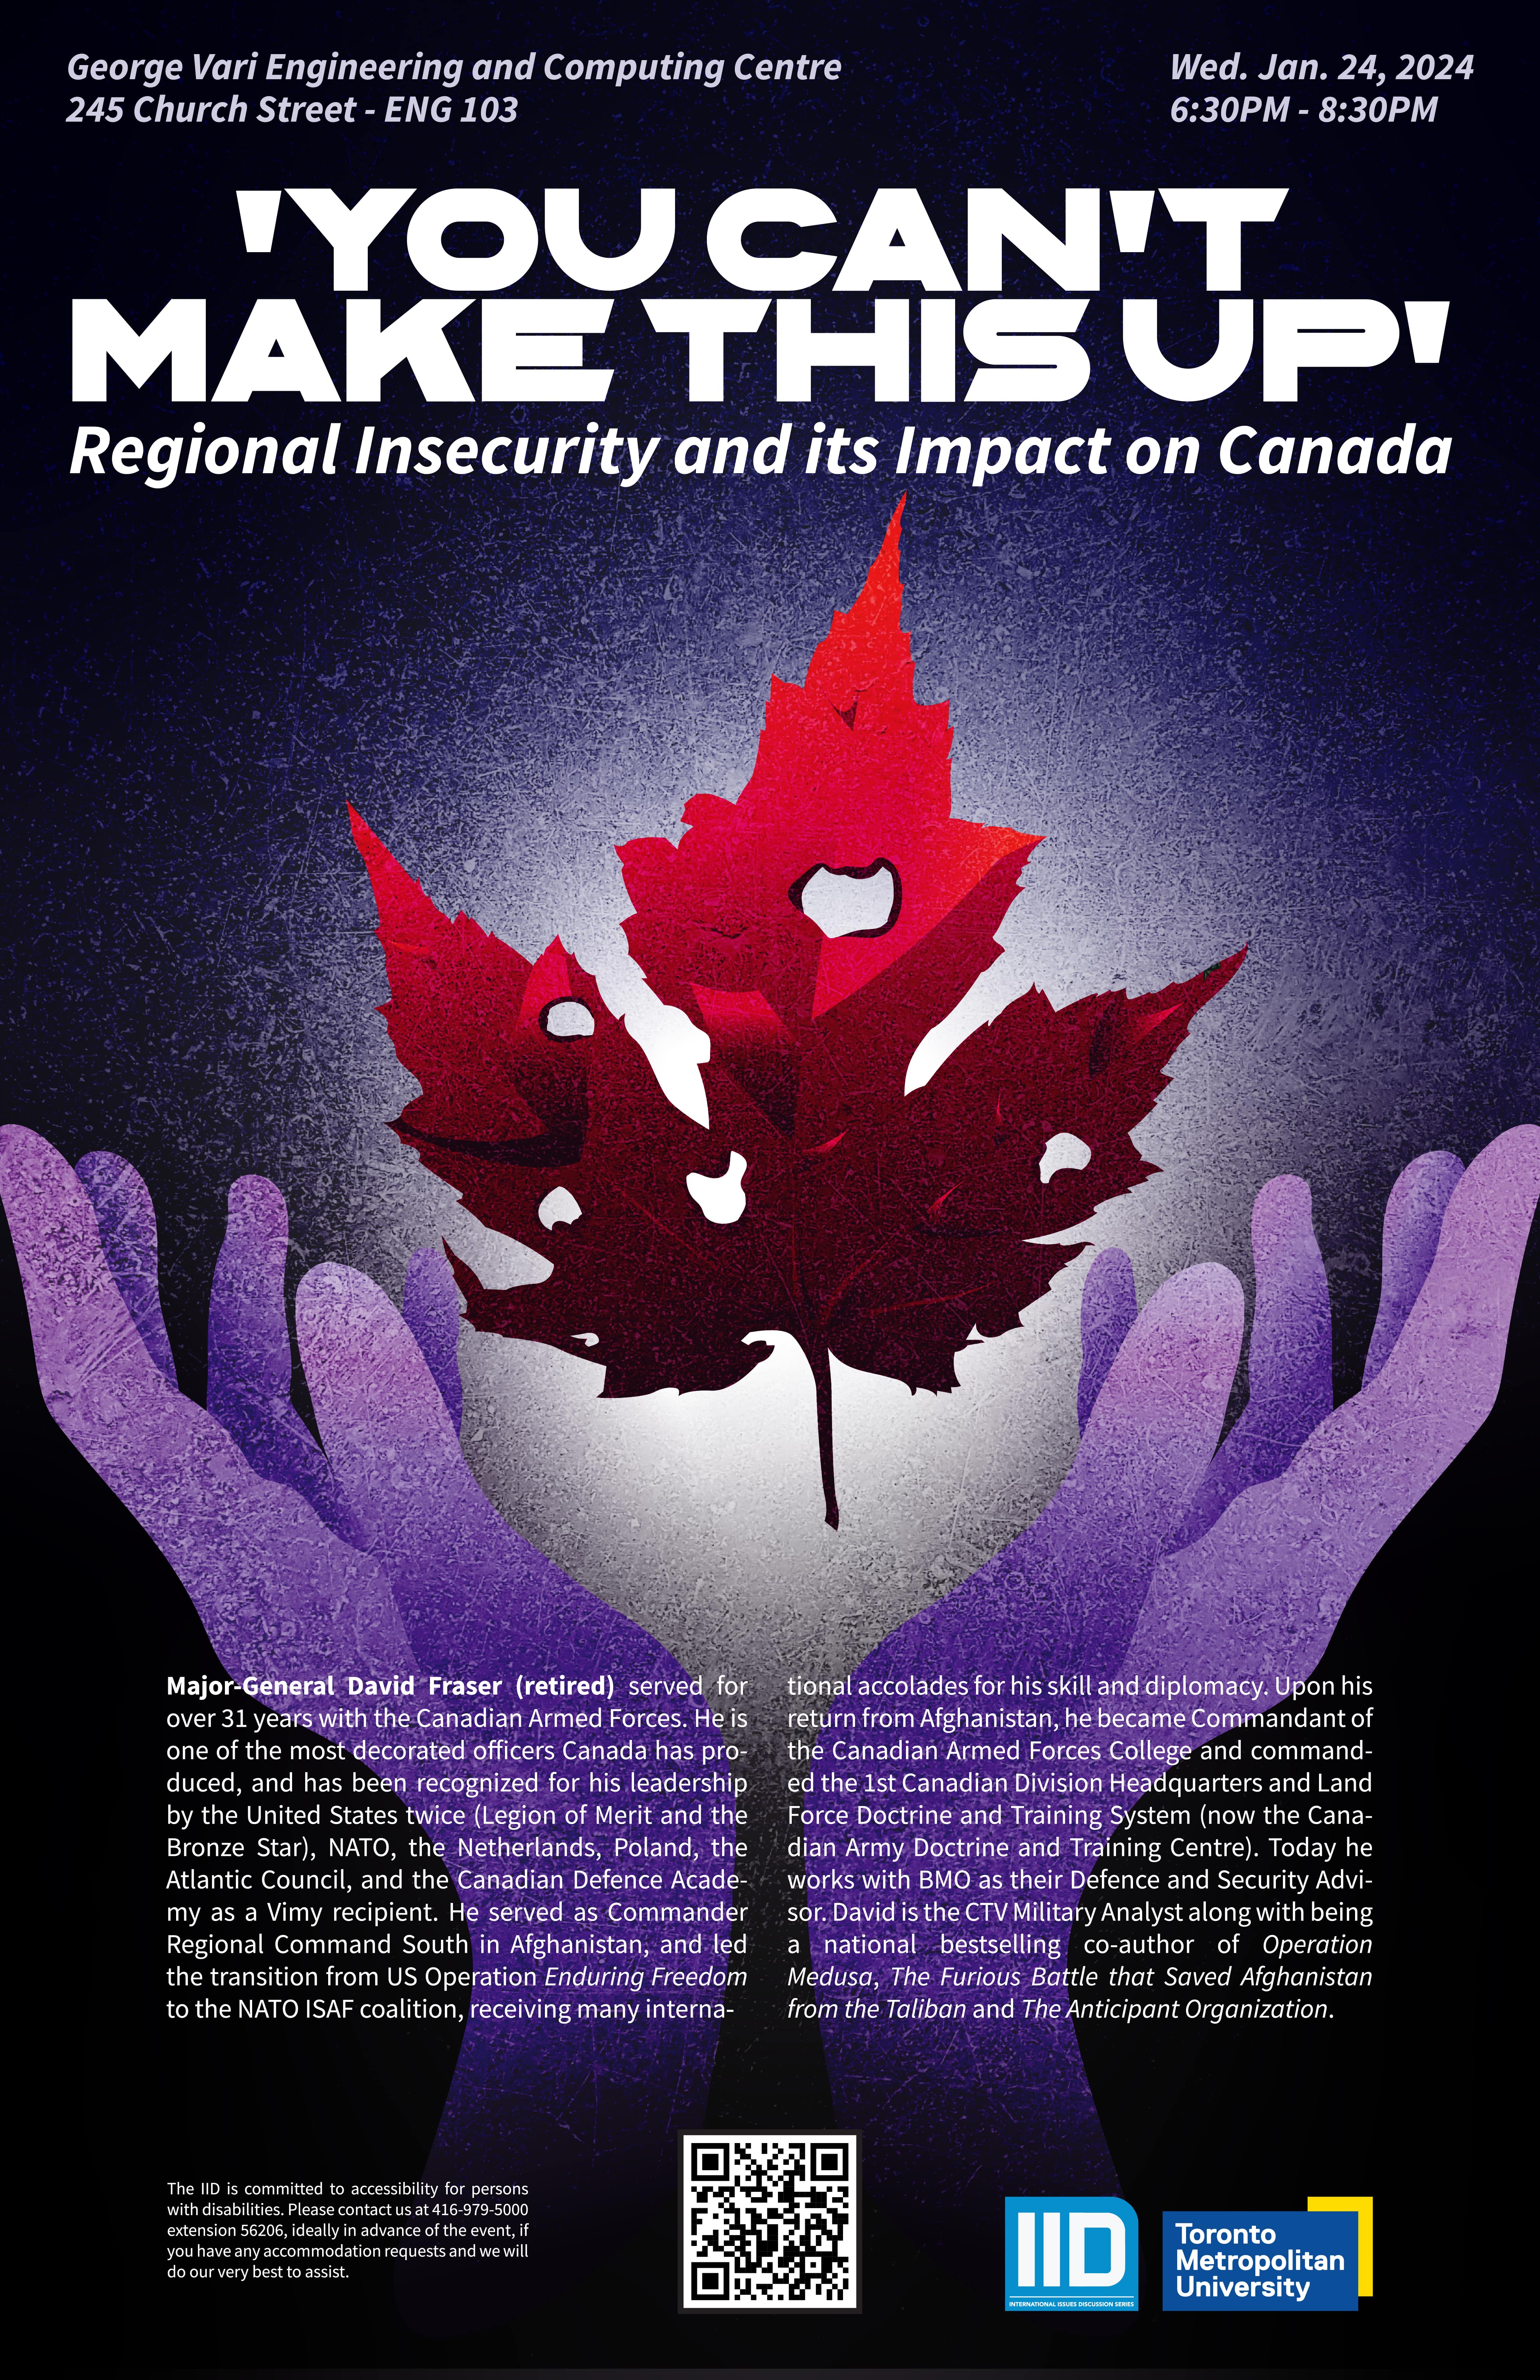 You Can’t Make This Stuff Up: Regional Insecurity and its Impact on Canada